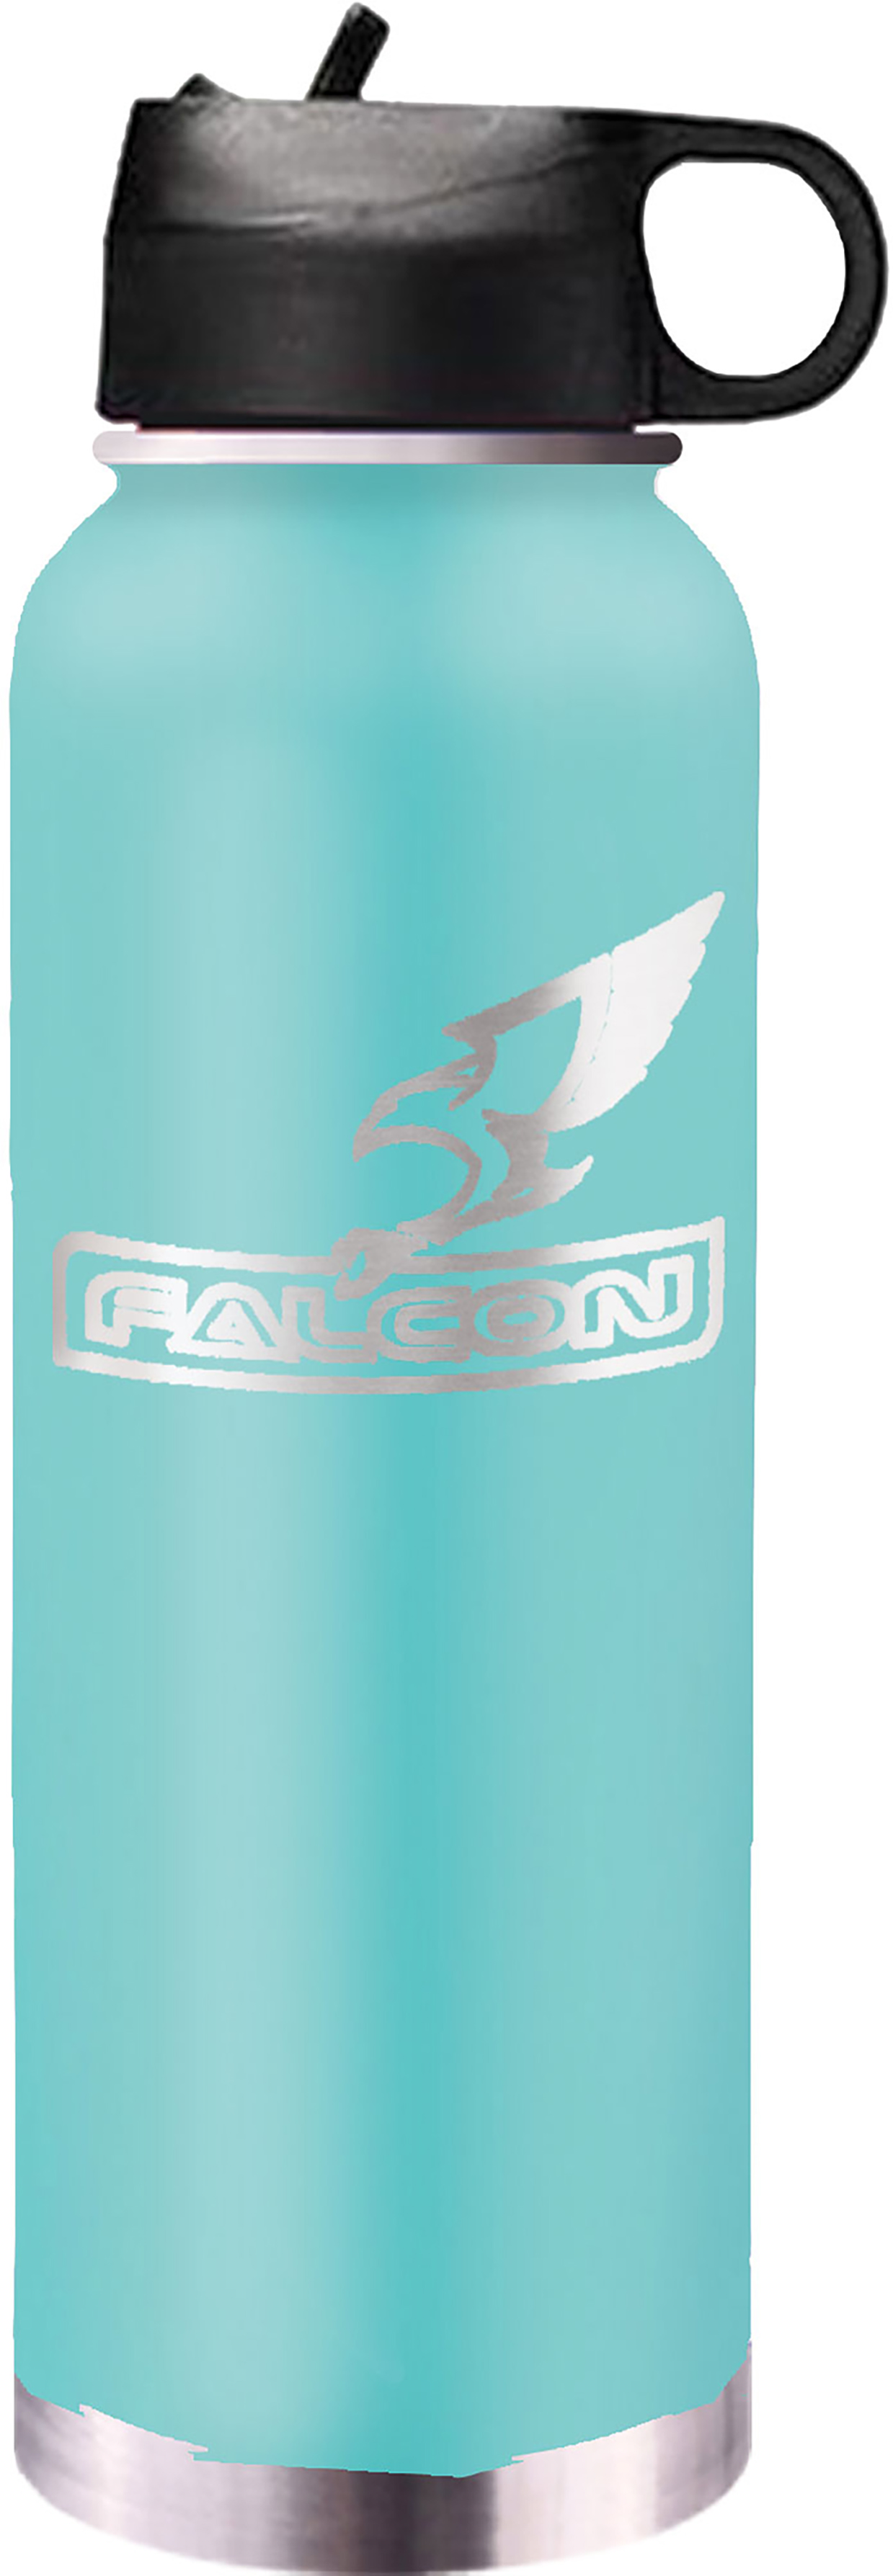 Tahoe© 32 oz. Insulated Water Bottle - Teal